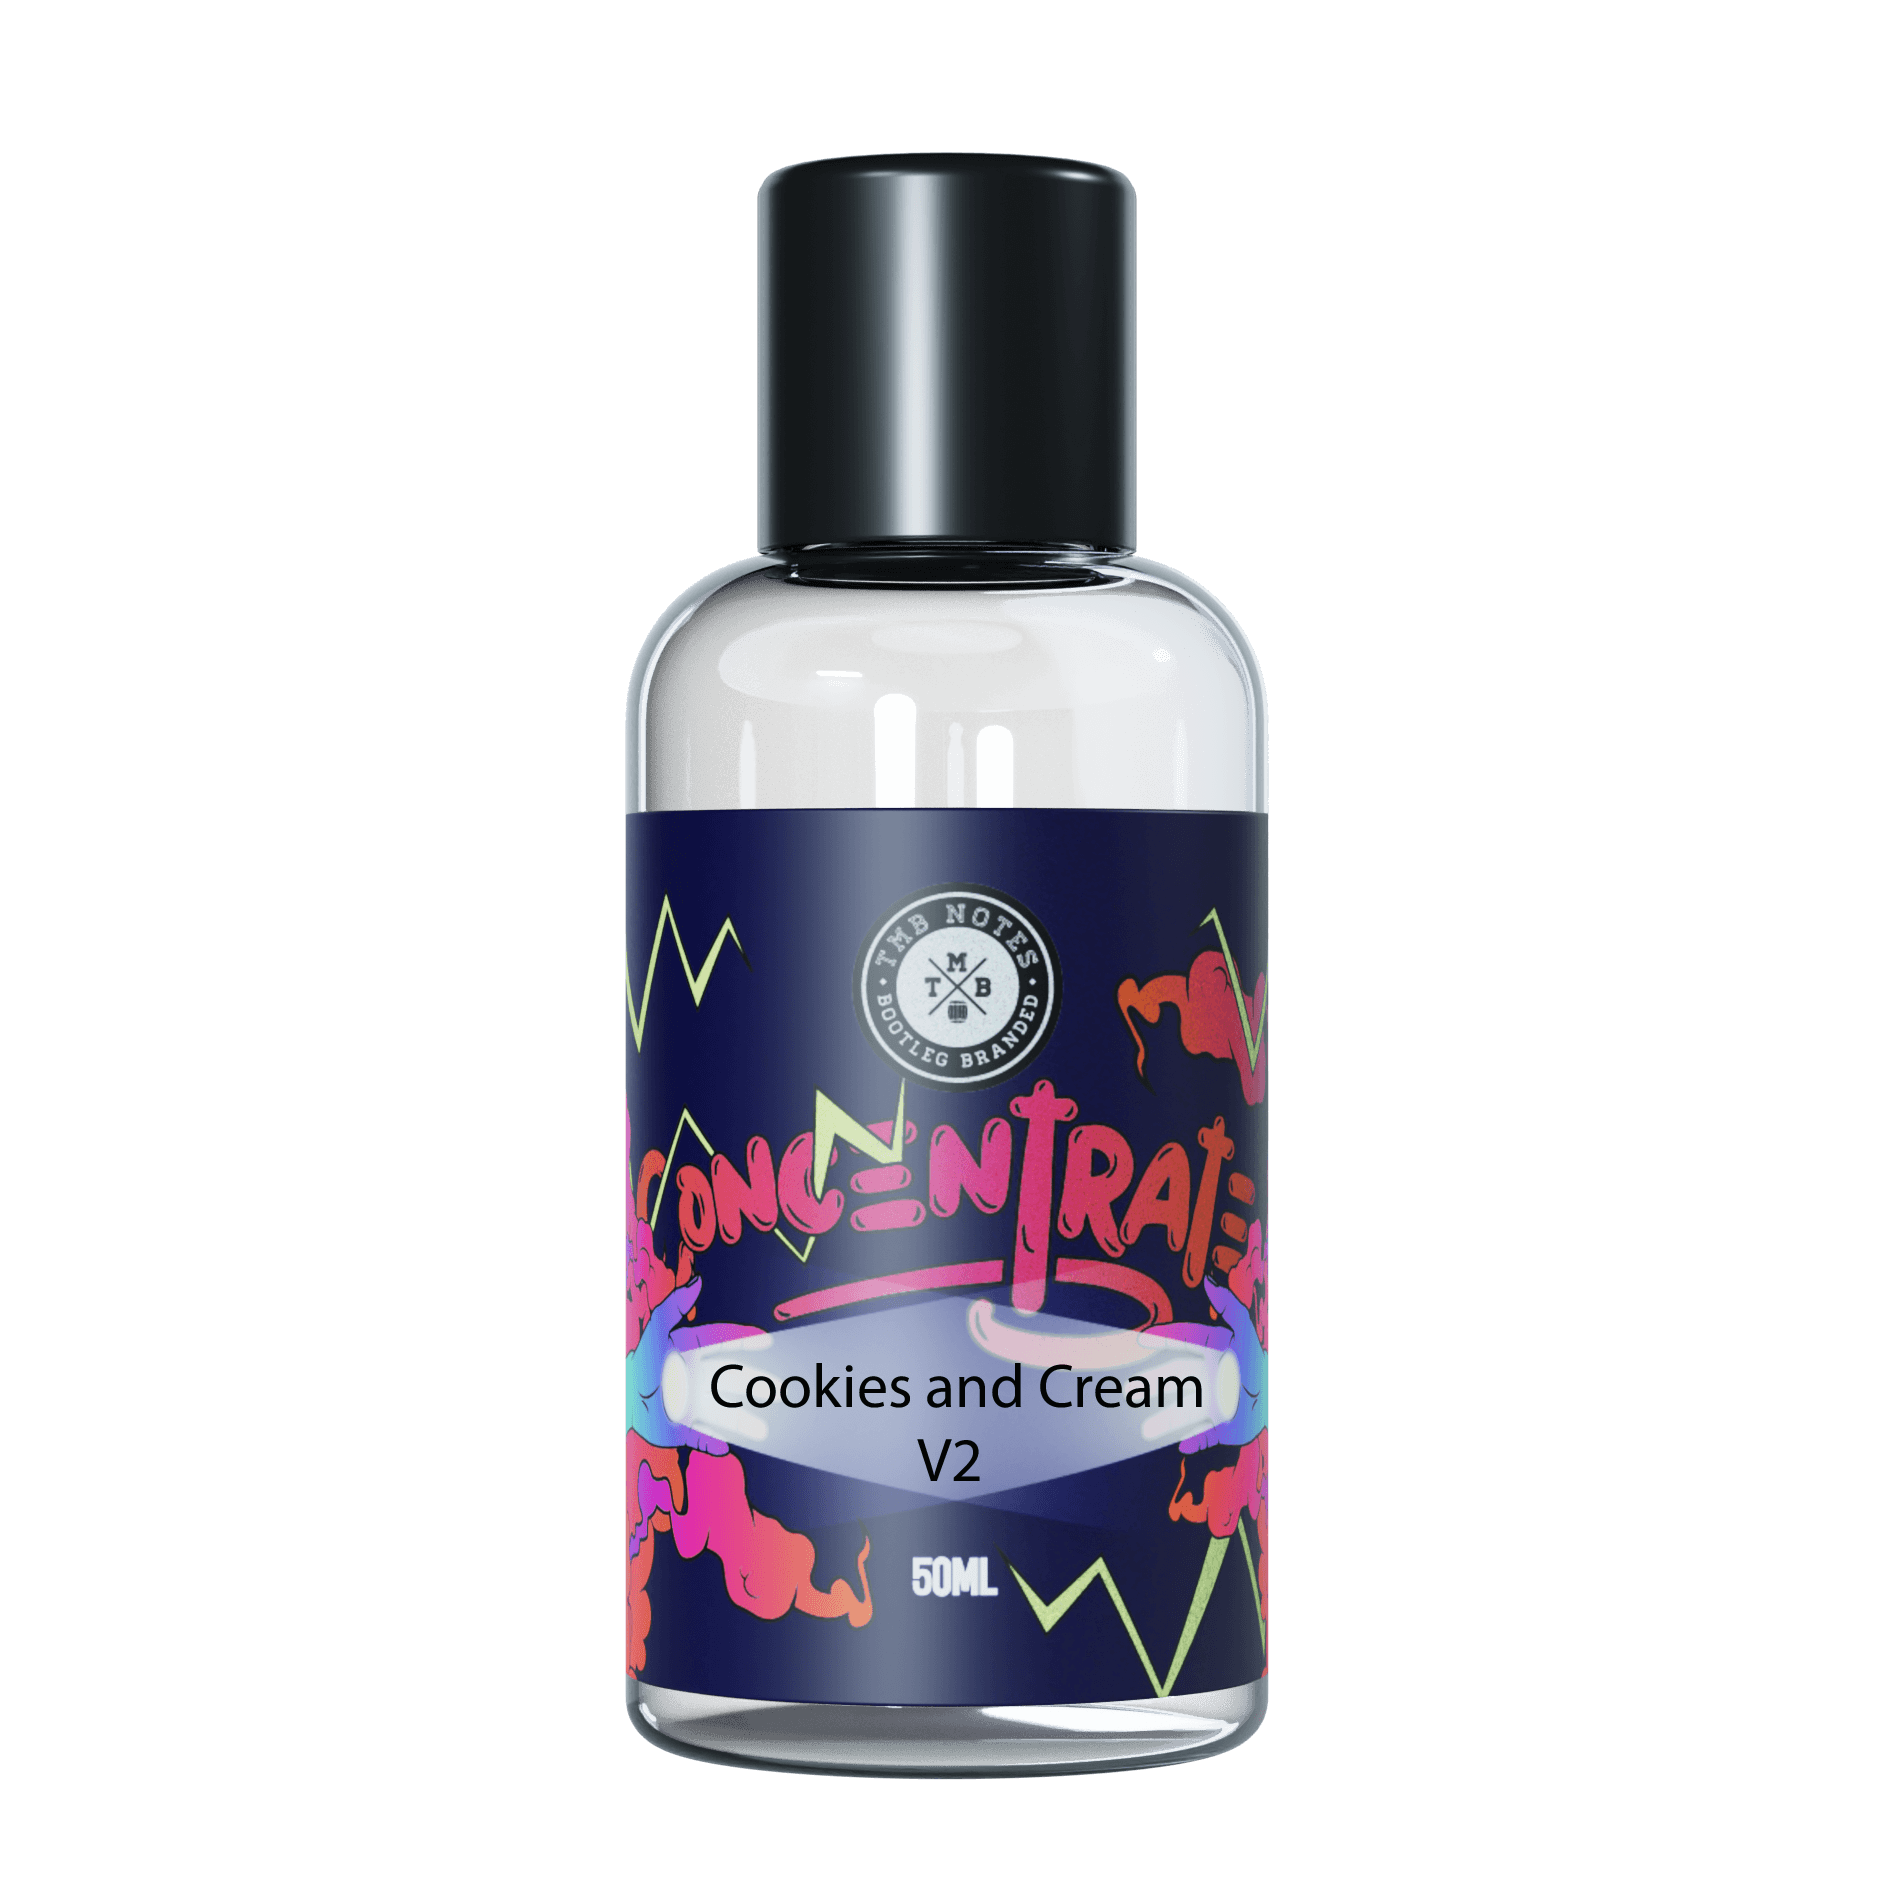 Cookies N Cream V2 E liquid Flavour Concentrate